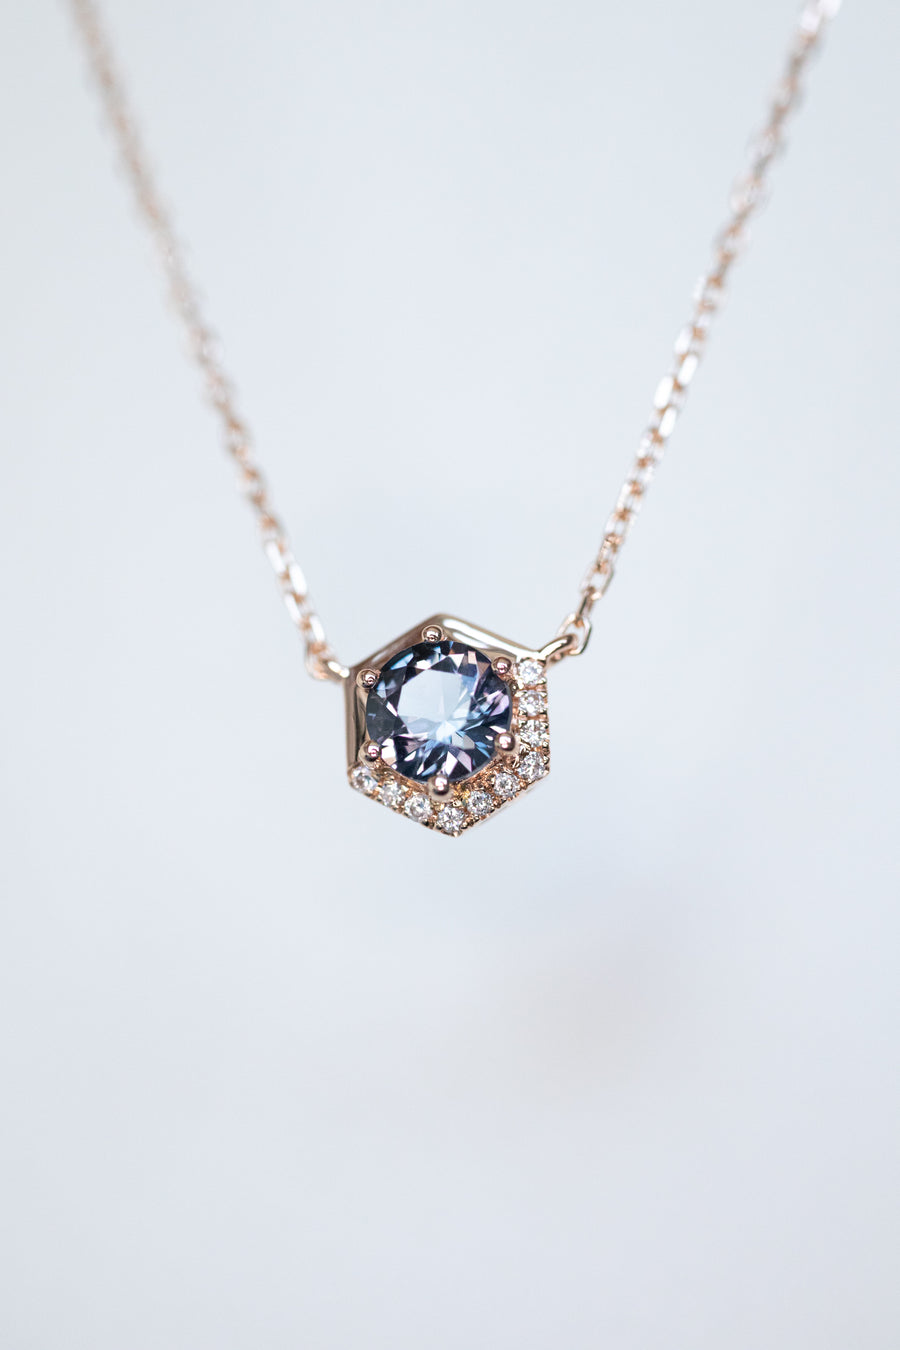 (Pre-Order) ~0.30ct Round Greyish Blue Spinel & 0.03ct Diamonds 14K/18K Rose Gold Necklace